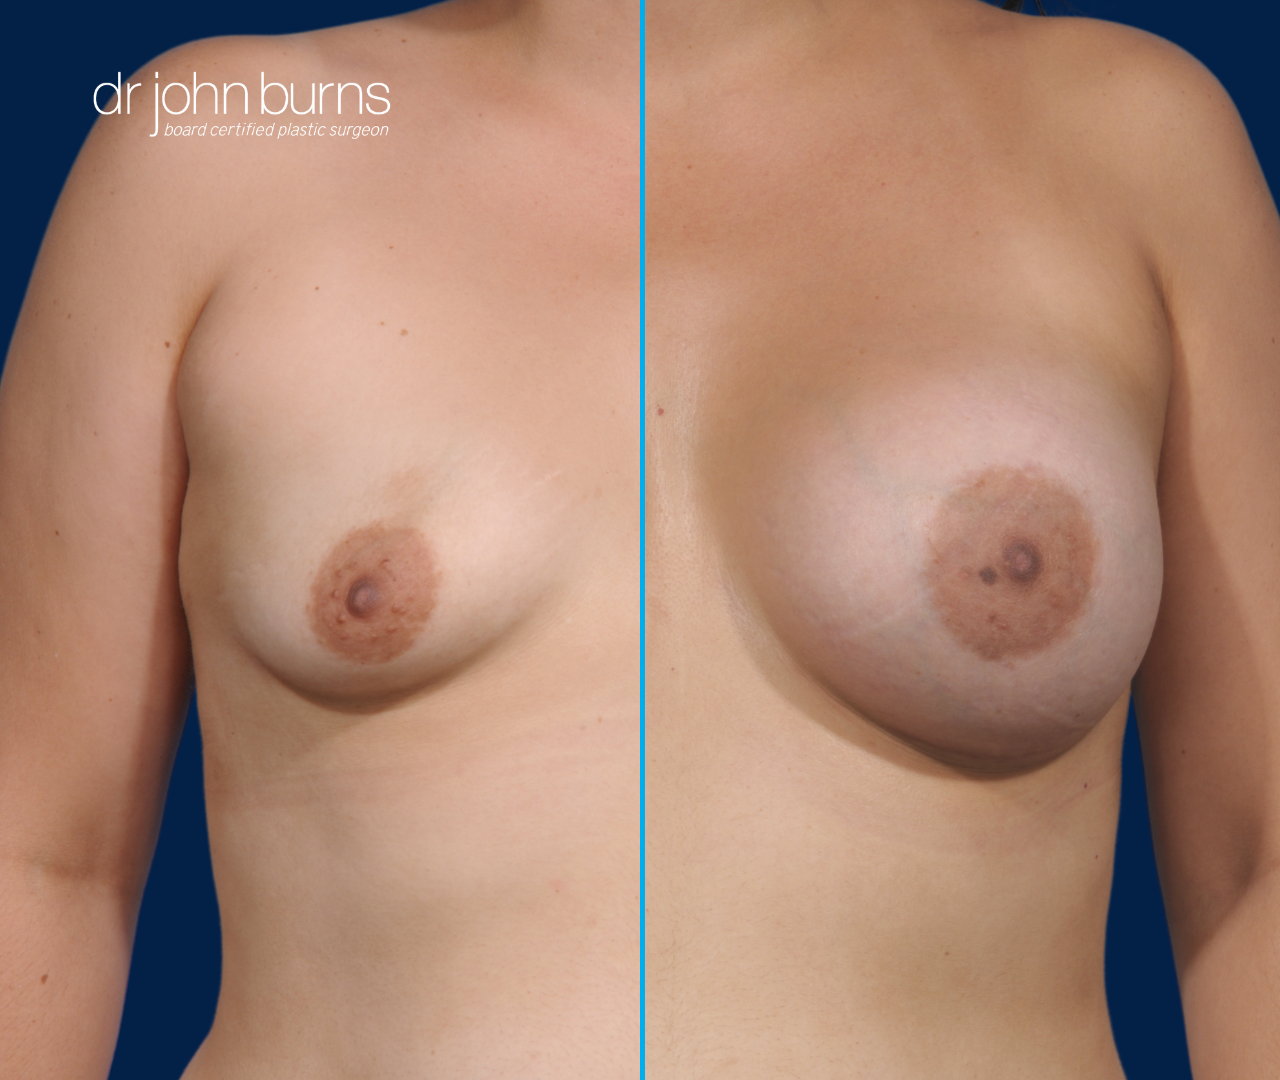 Before & After Breast Implants by Dr. John Burns, Dallas Plastic Surgeon